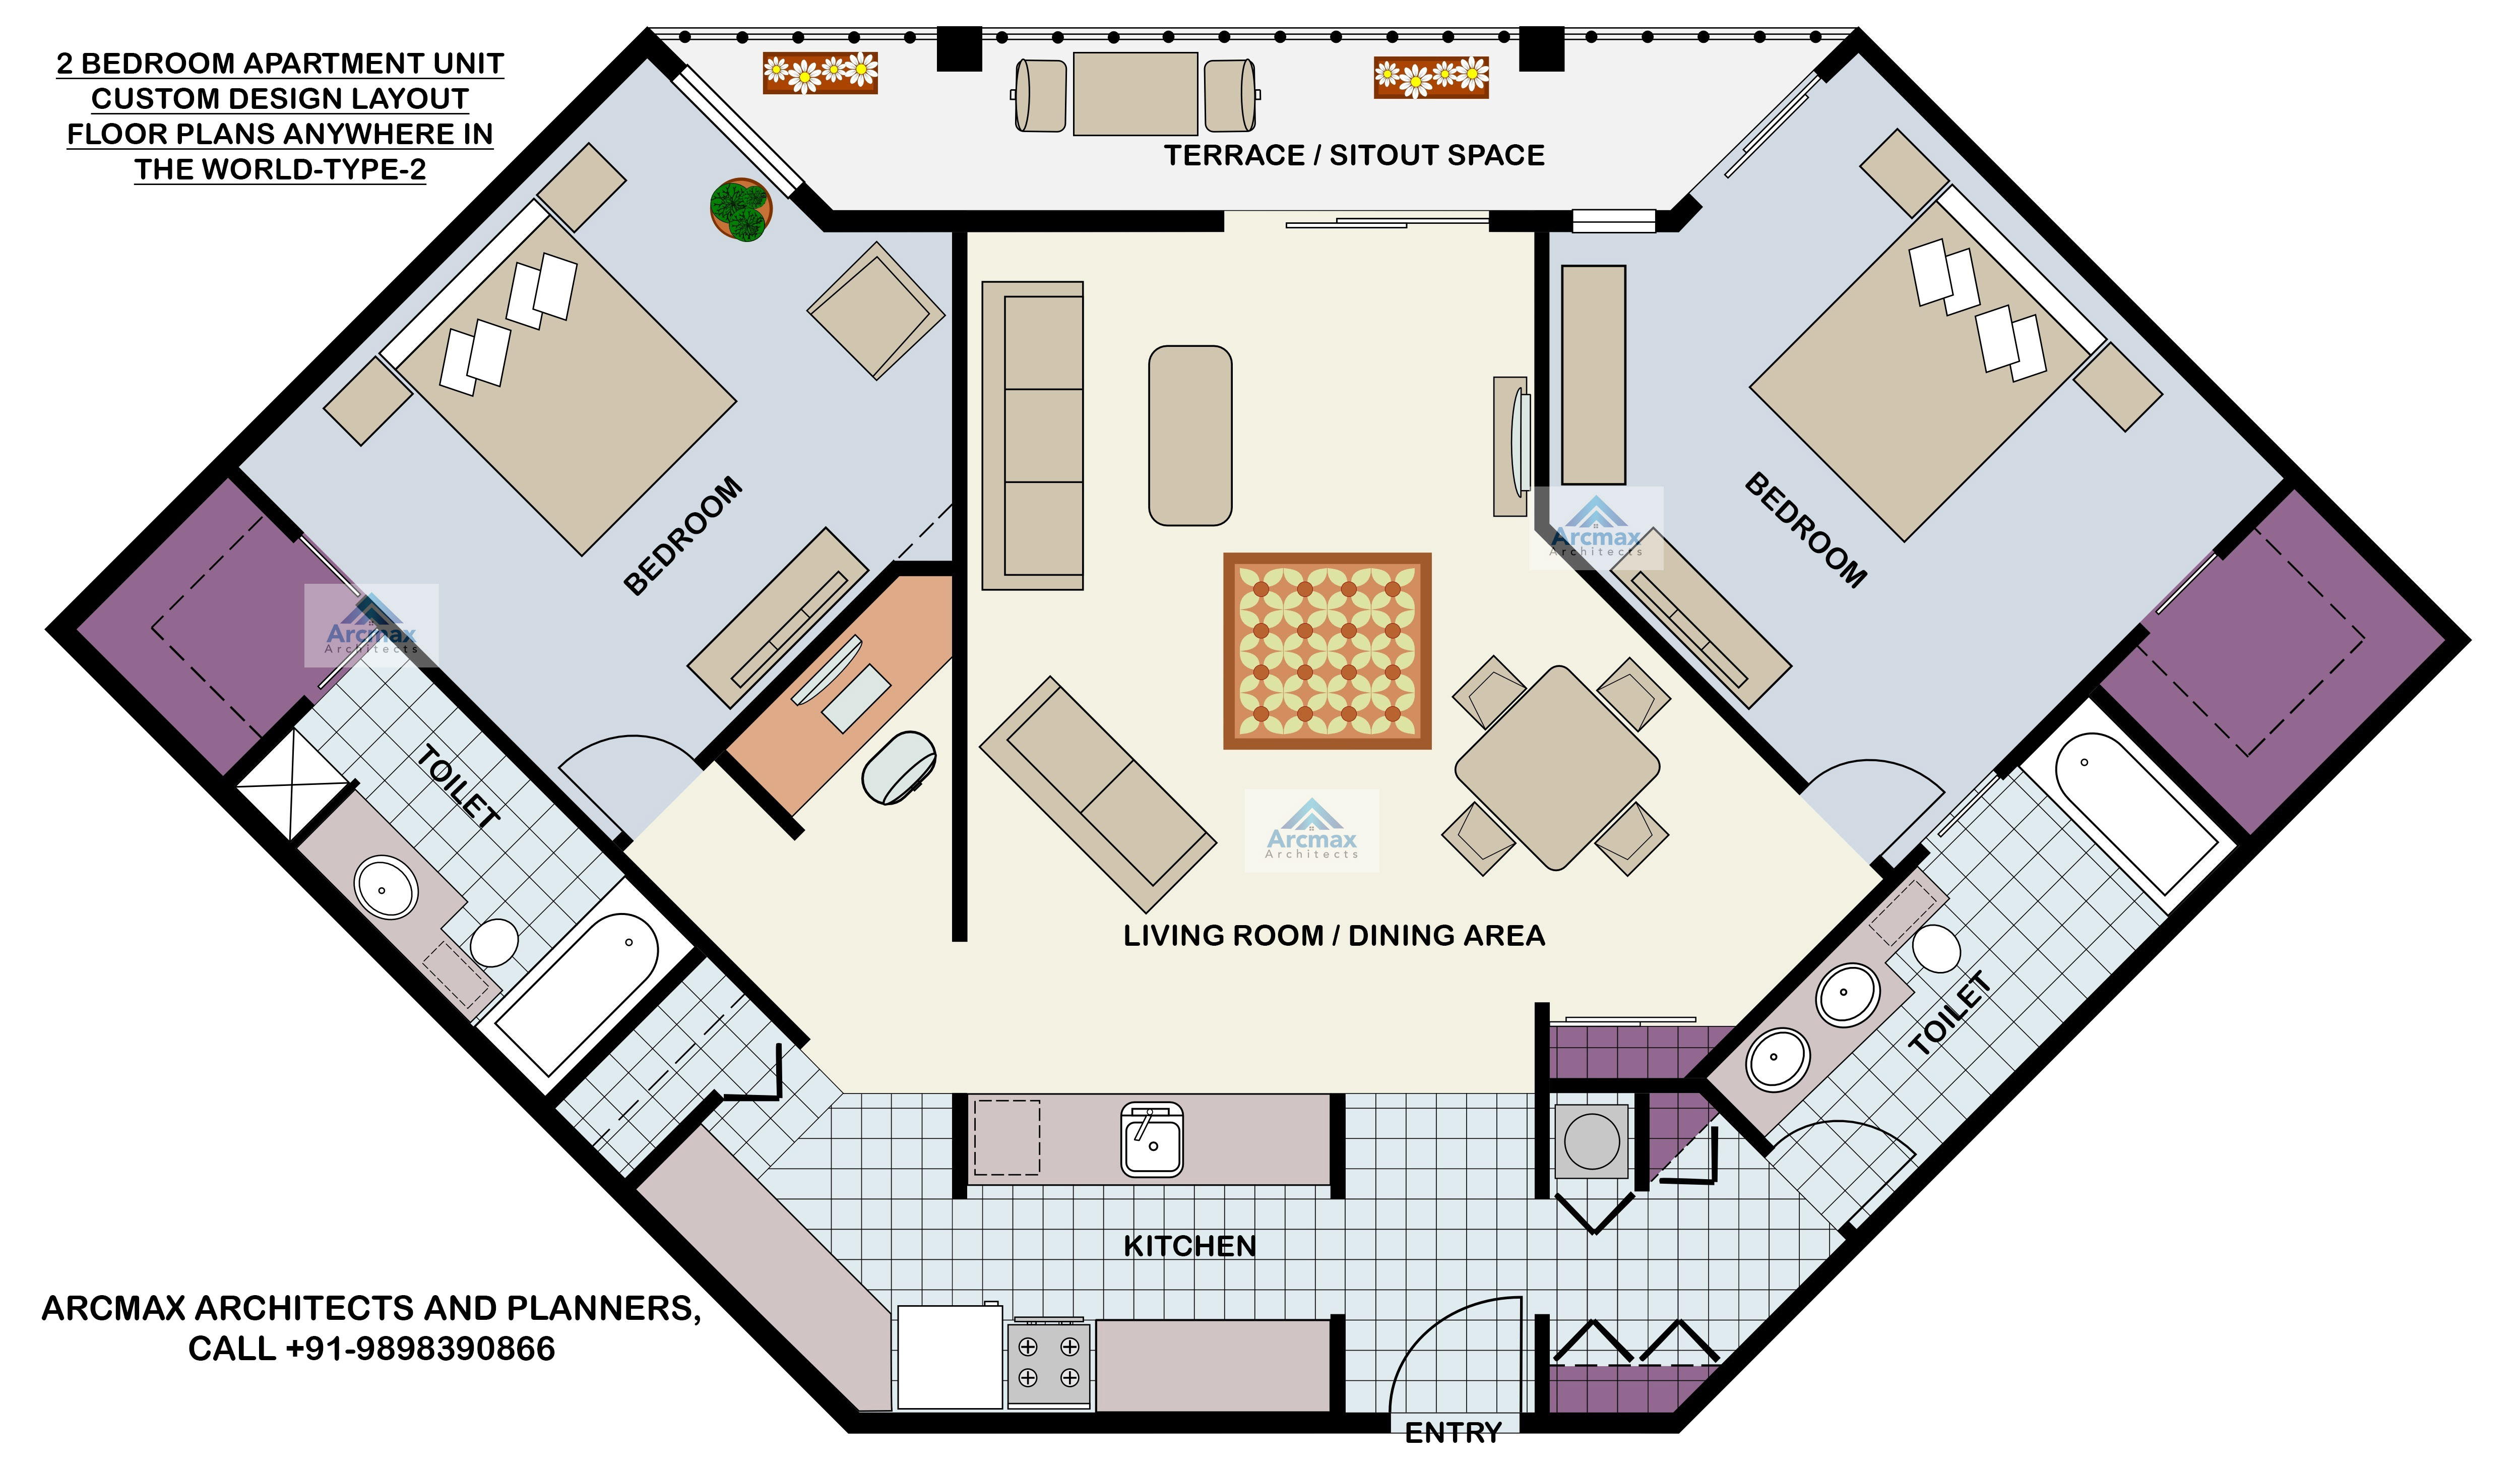 2 BEDROOM APARTMENT UNIT CUSTOM DESIGN LAYOUT FLOOR PLANS ANYWHERE IN THE WORLD-TYPE-2